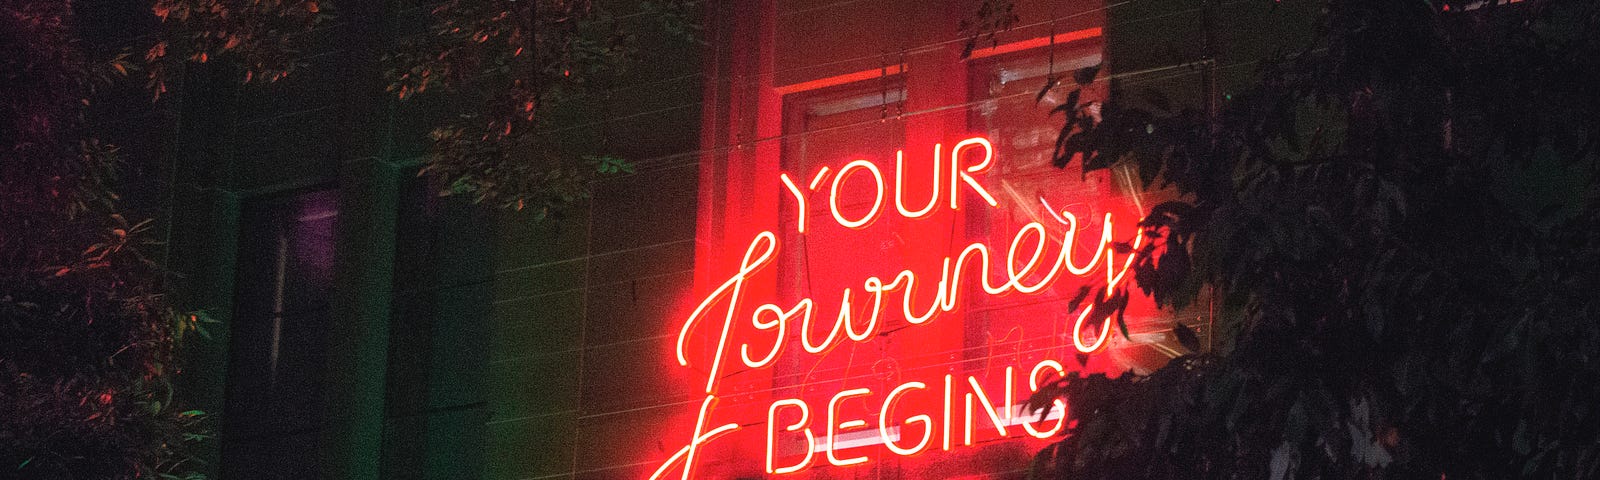 A red neon sign over a neon green entry that reads, “Your Journey BEGINS HERE”.